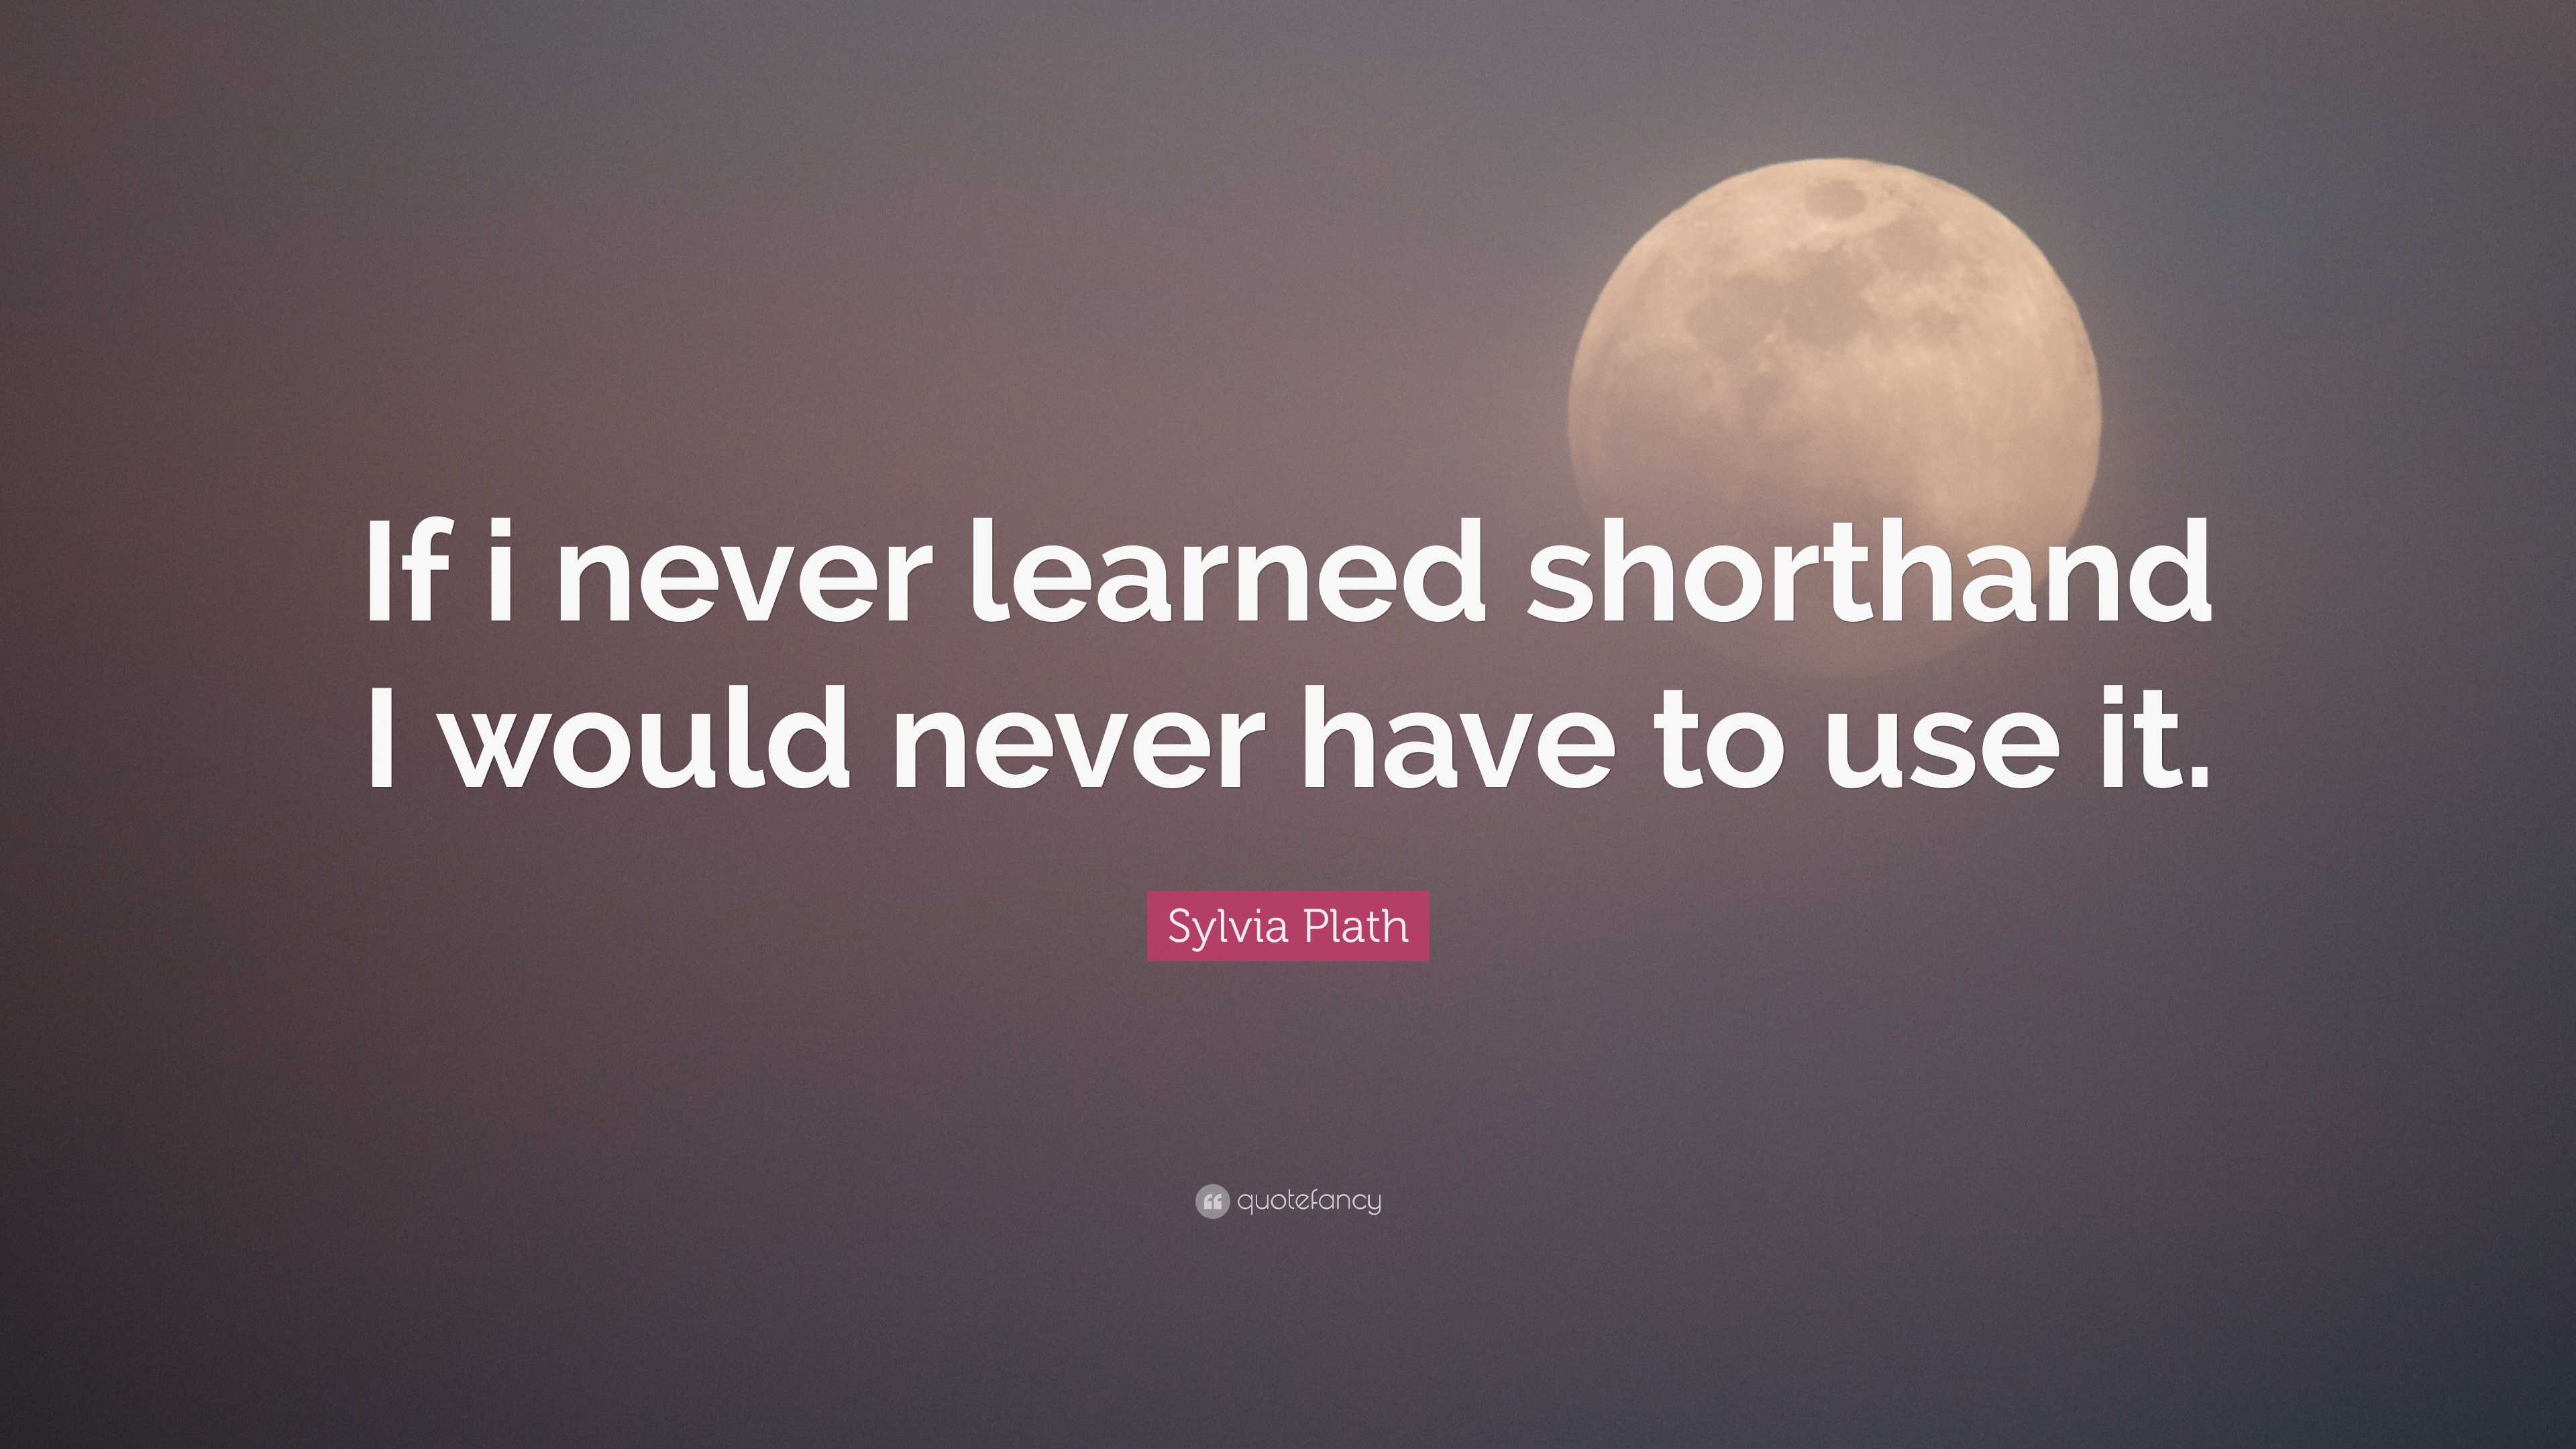 Sylvia Plath Quote: “If i never learned shorthand I would never have to ...